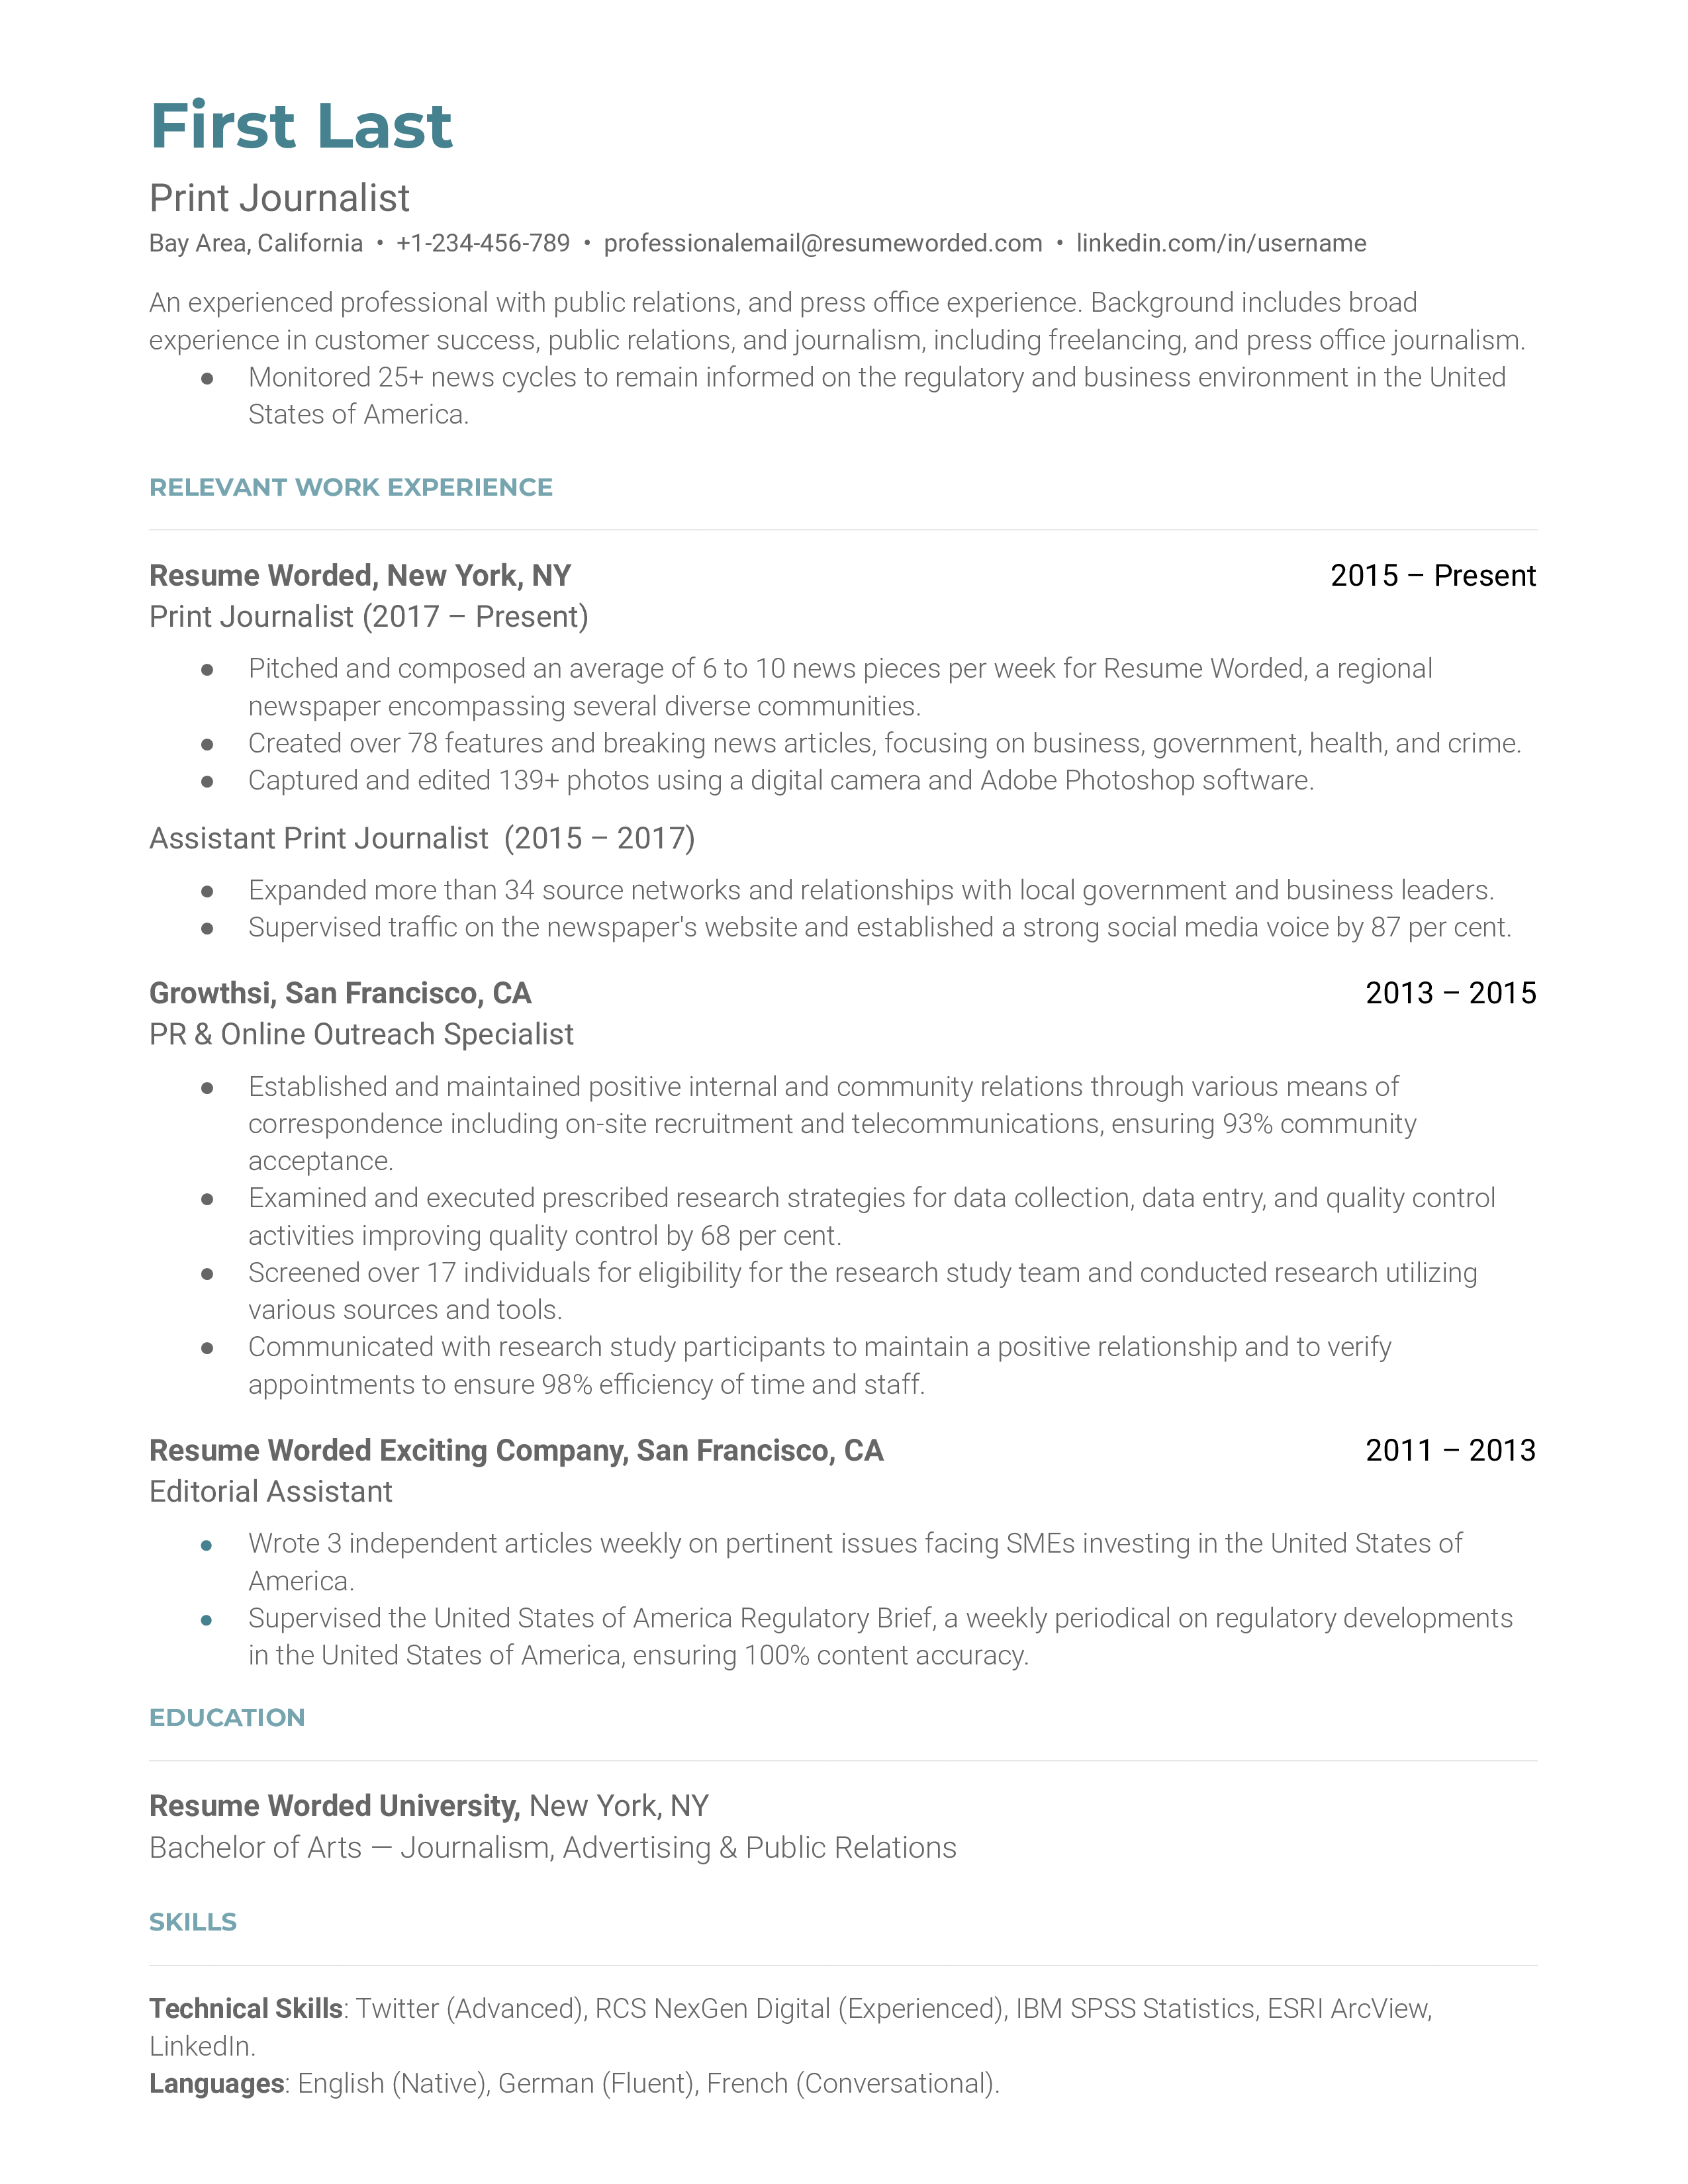 Print journalist resume sample that highlights the applicant's journalistic output and career progression